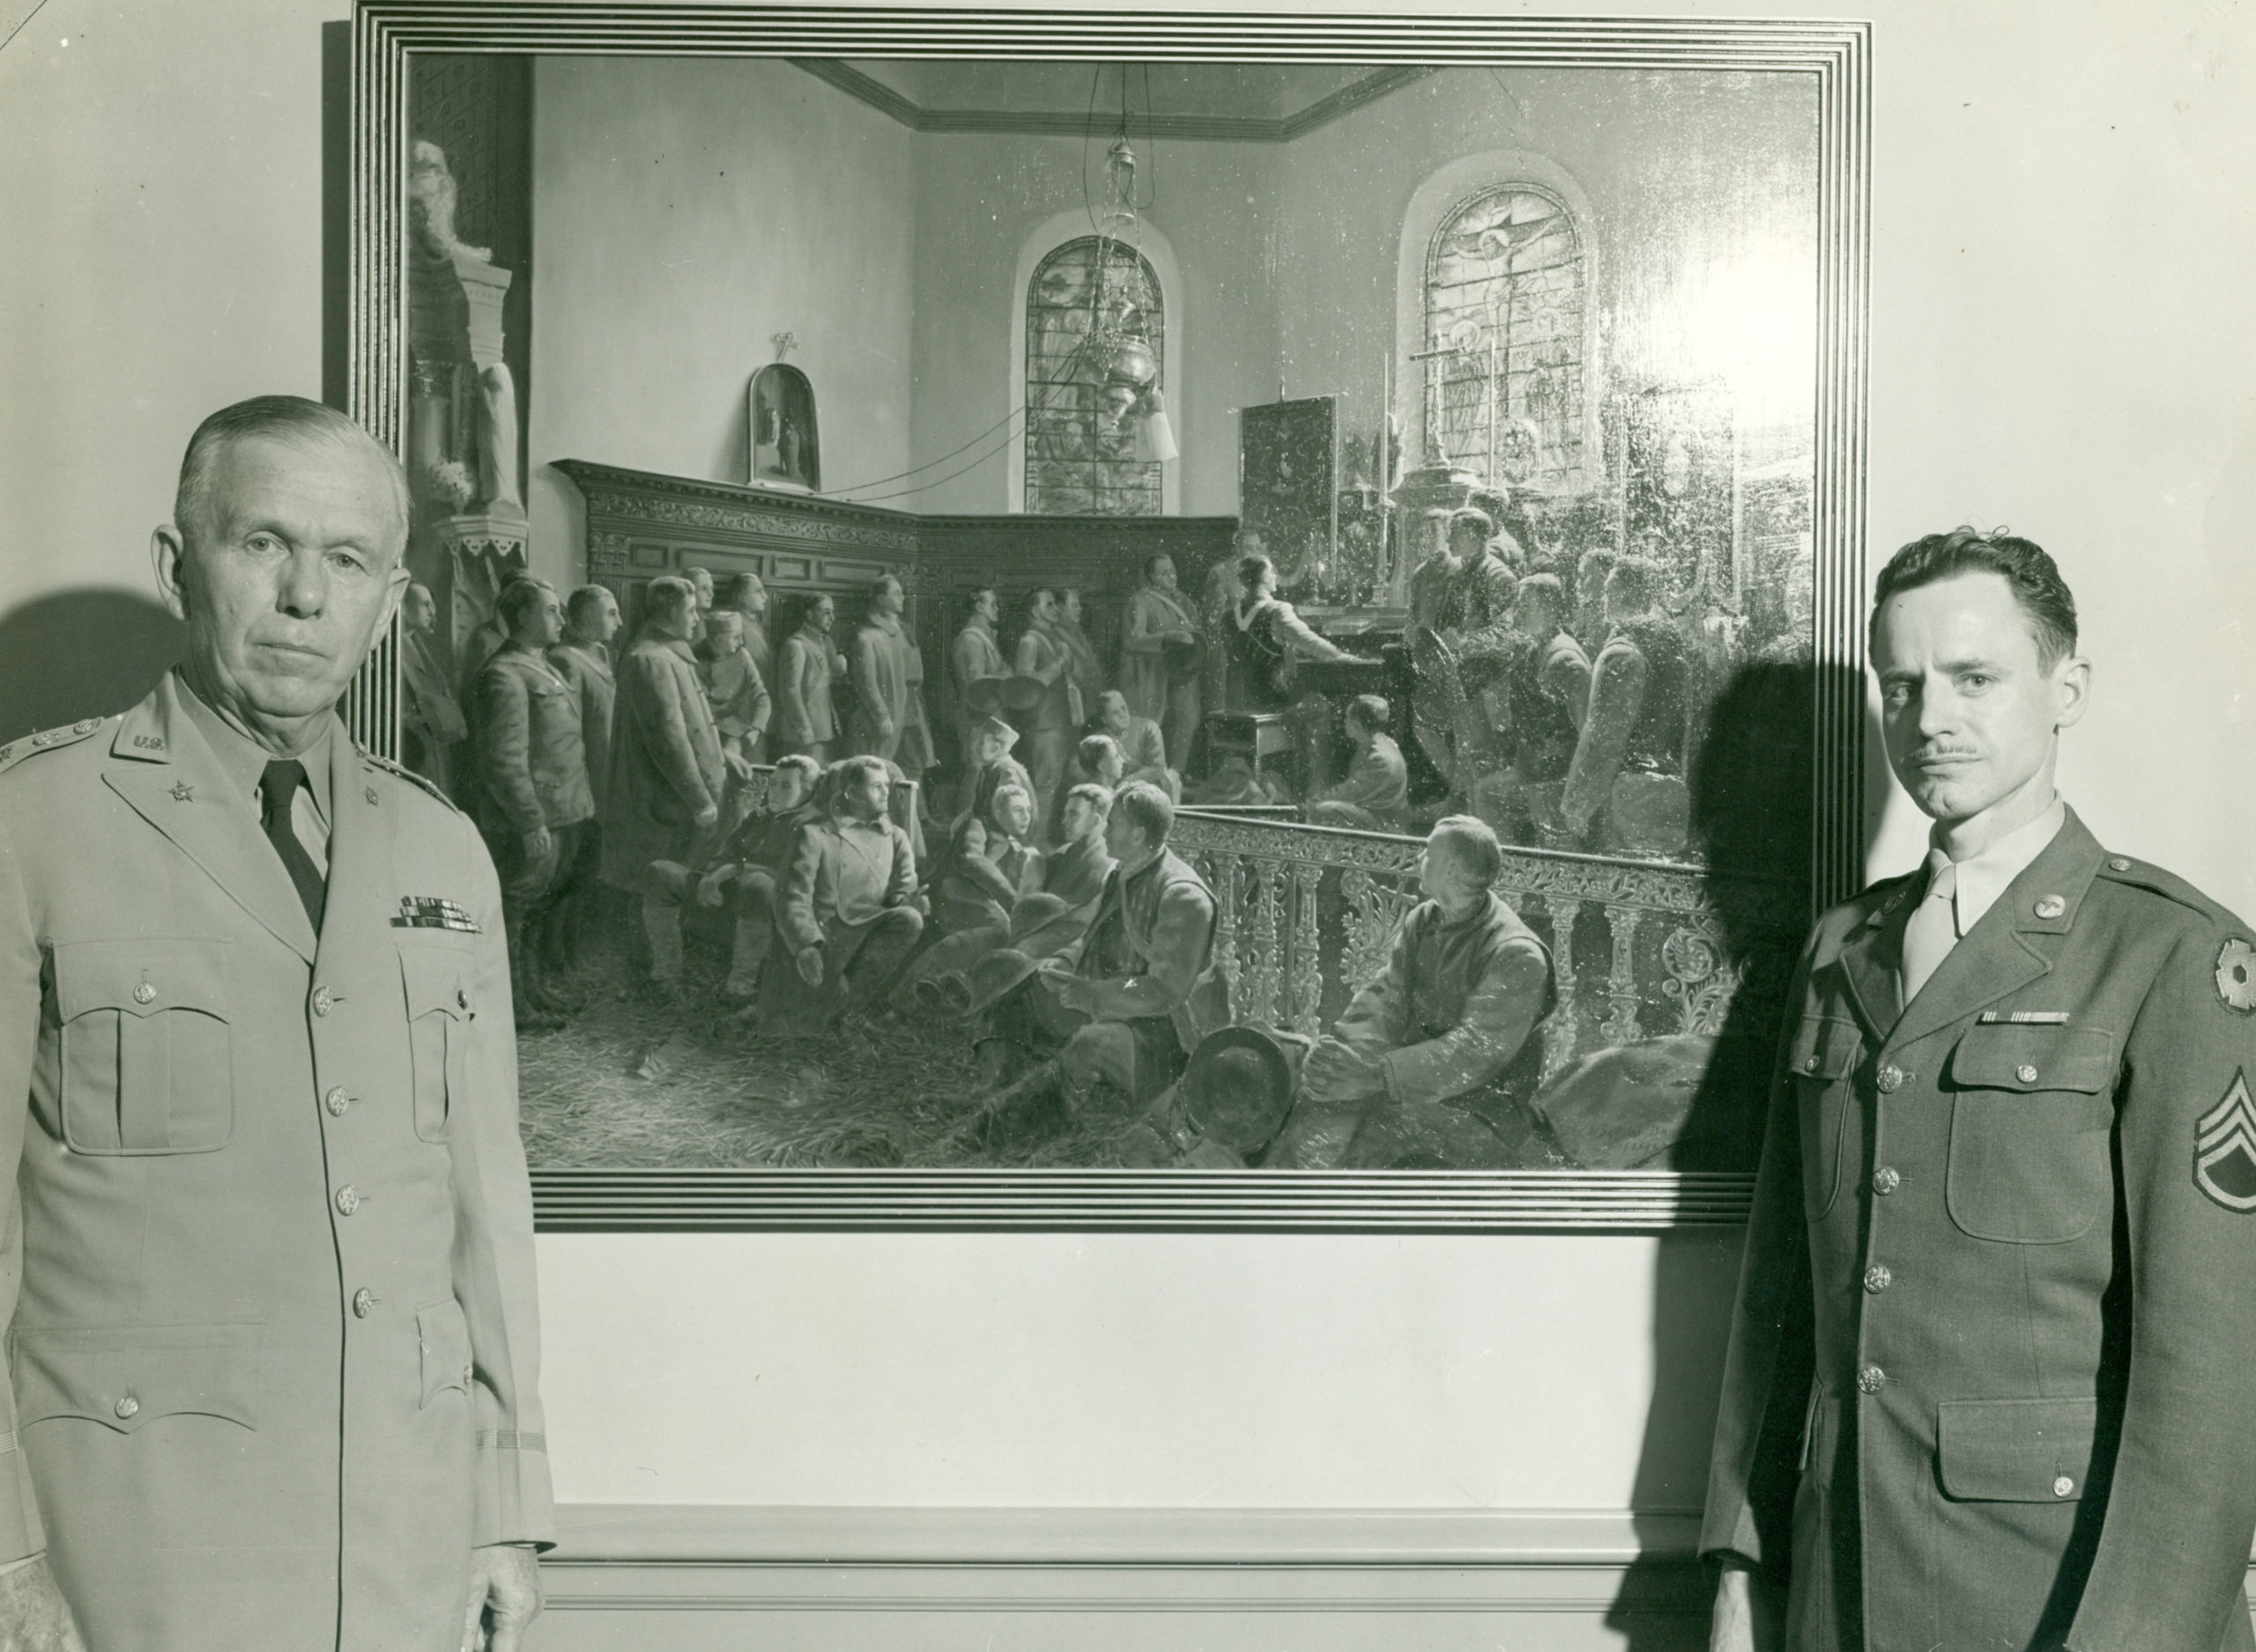 General Marshall and artists SSgt Wallace Brodeur, May 21, 1945.